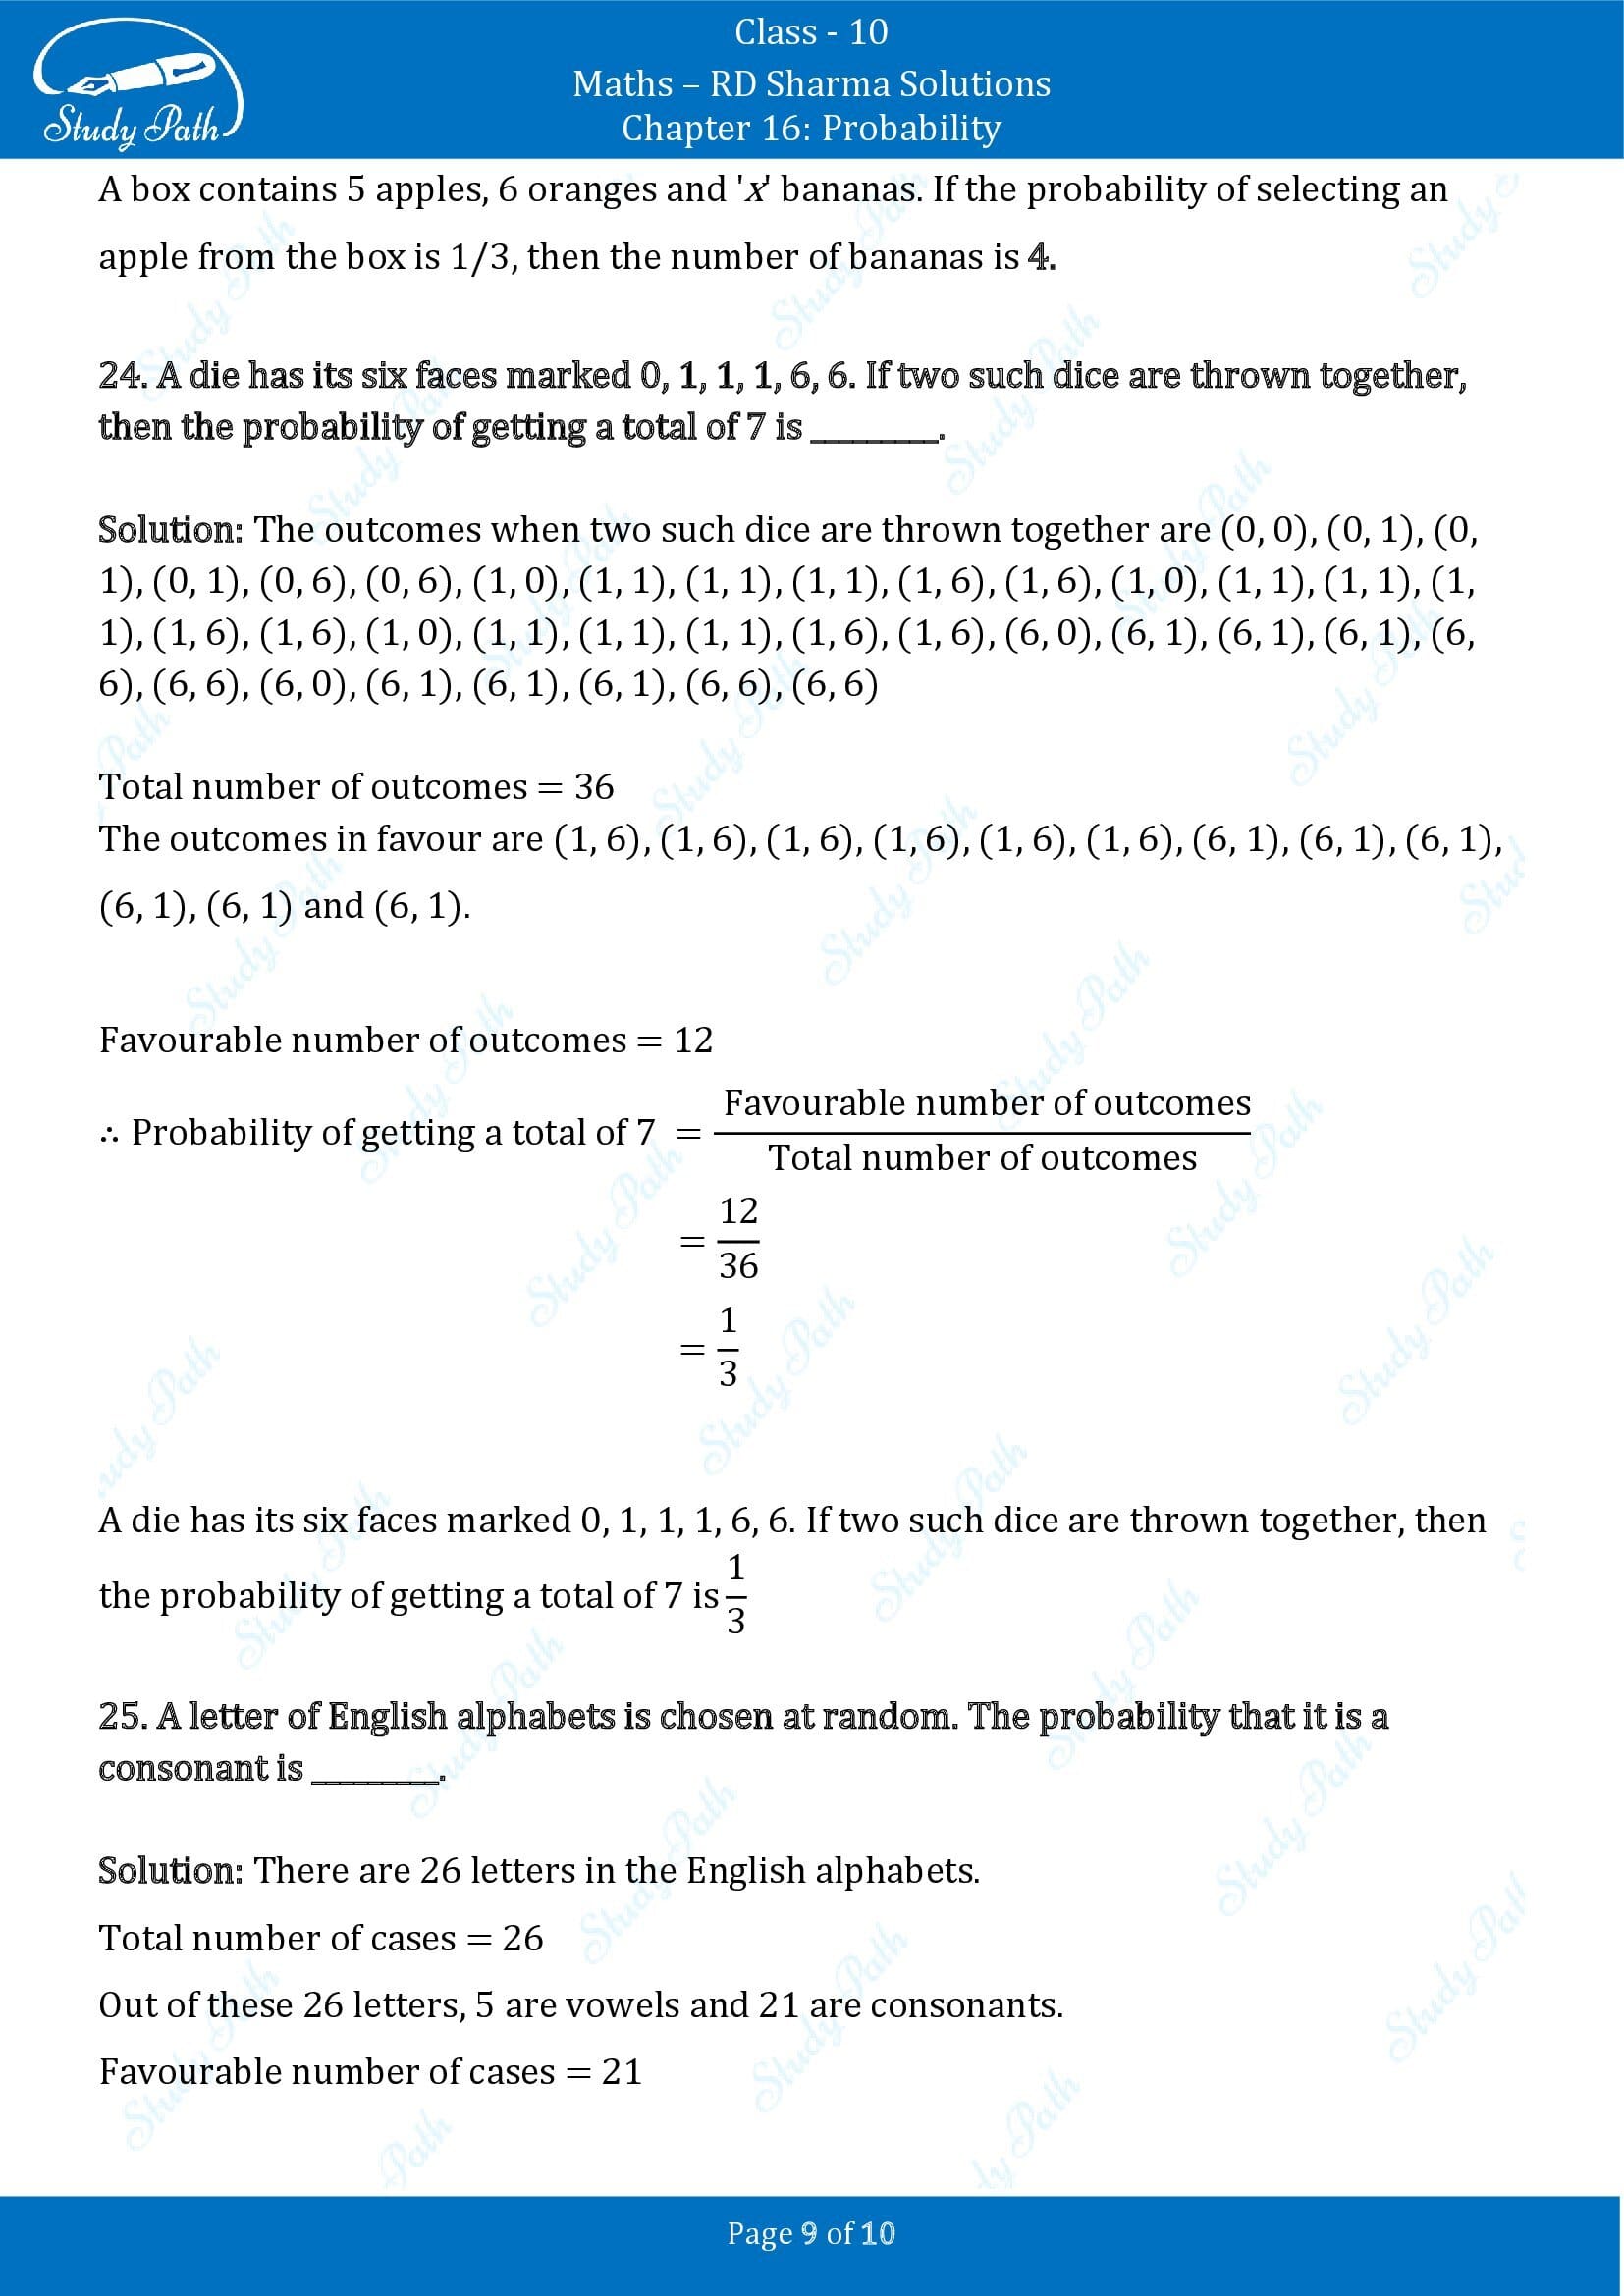 RD Sharma Solutions Class 10 Chapter 16 Probability Fill in the Blank Type Questions FBQs 00009